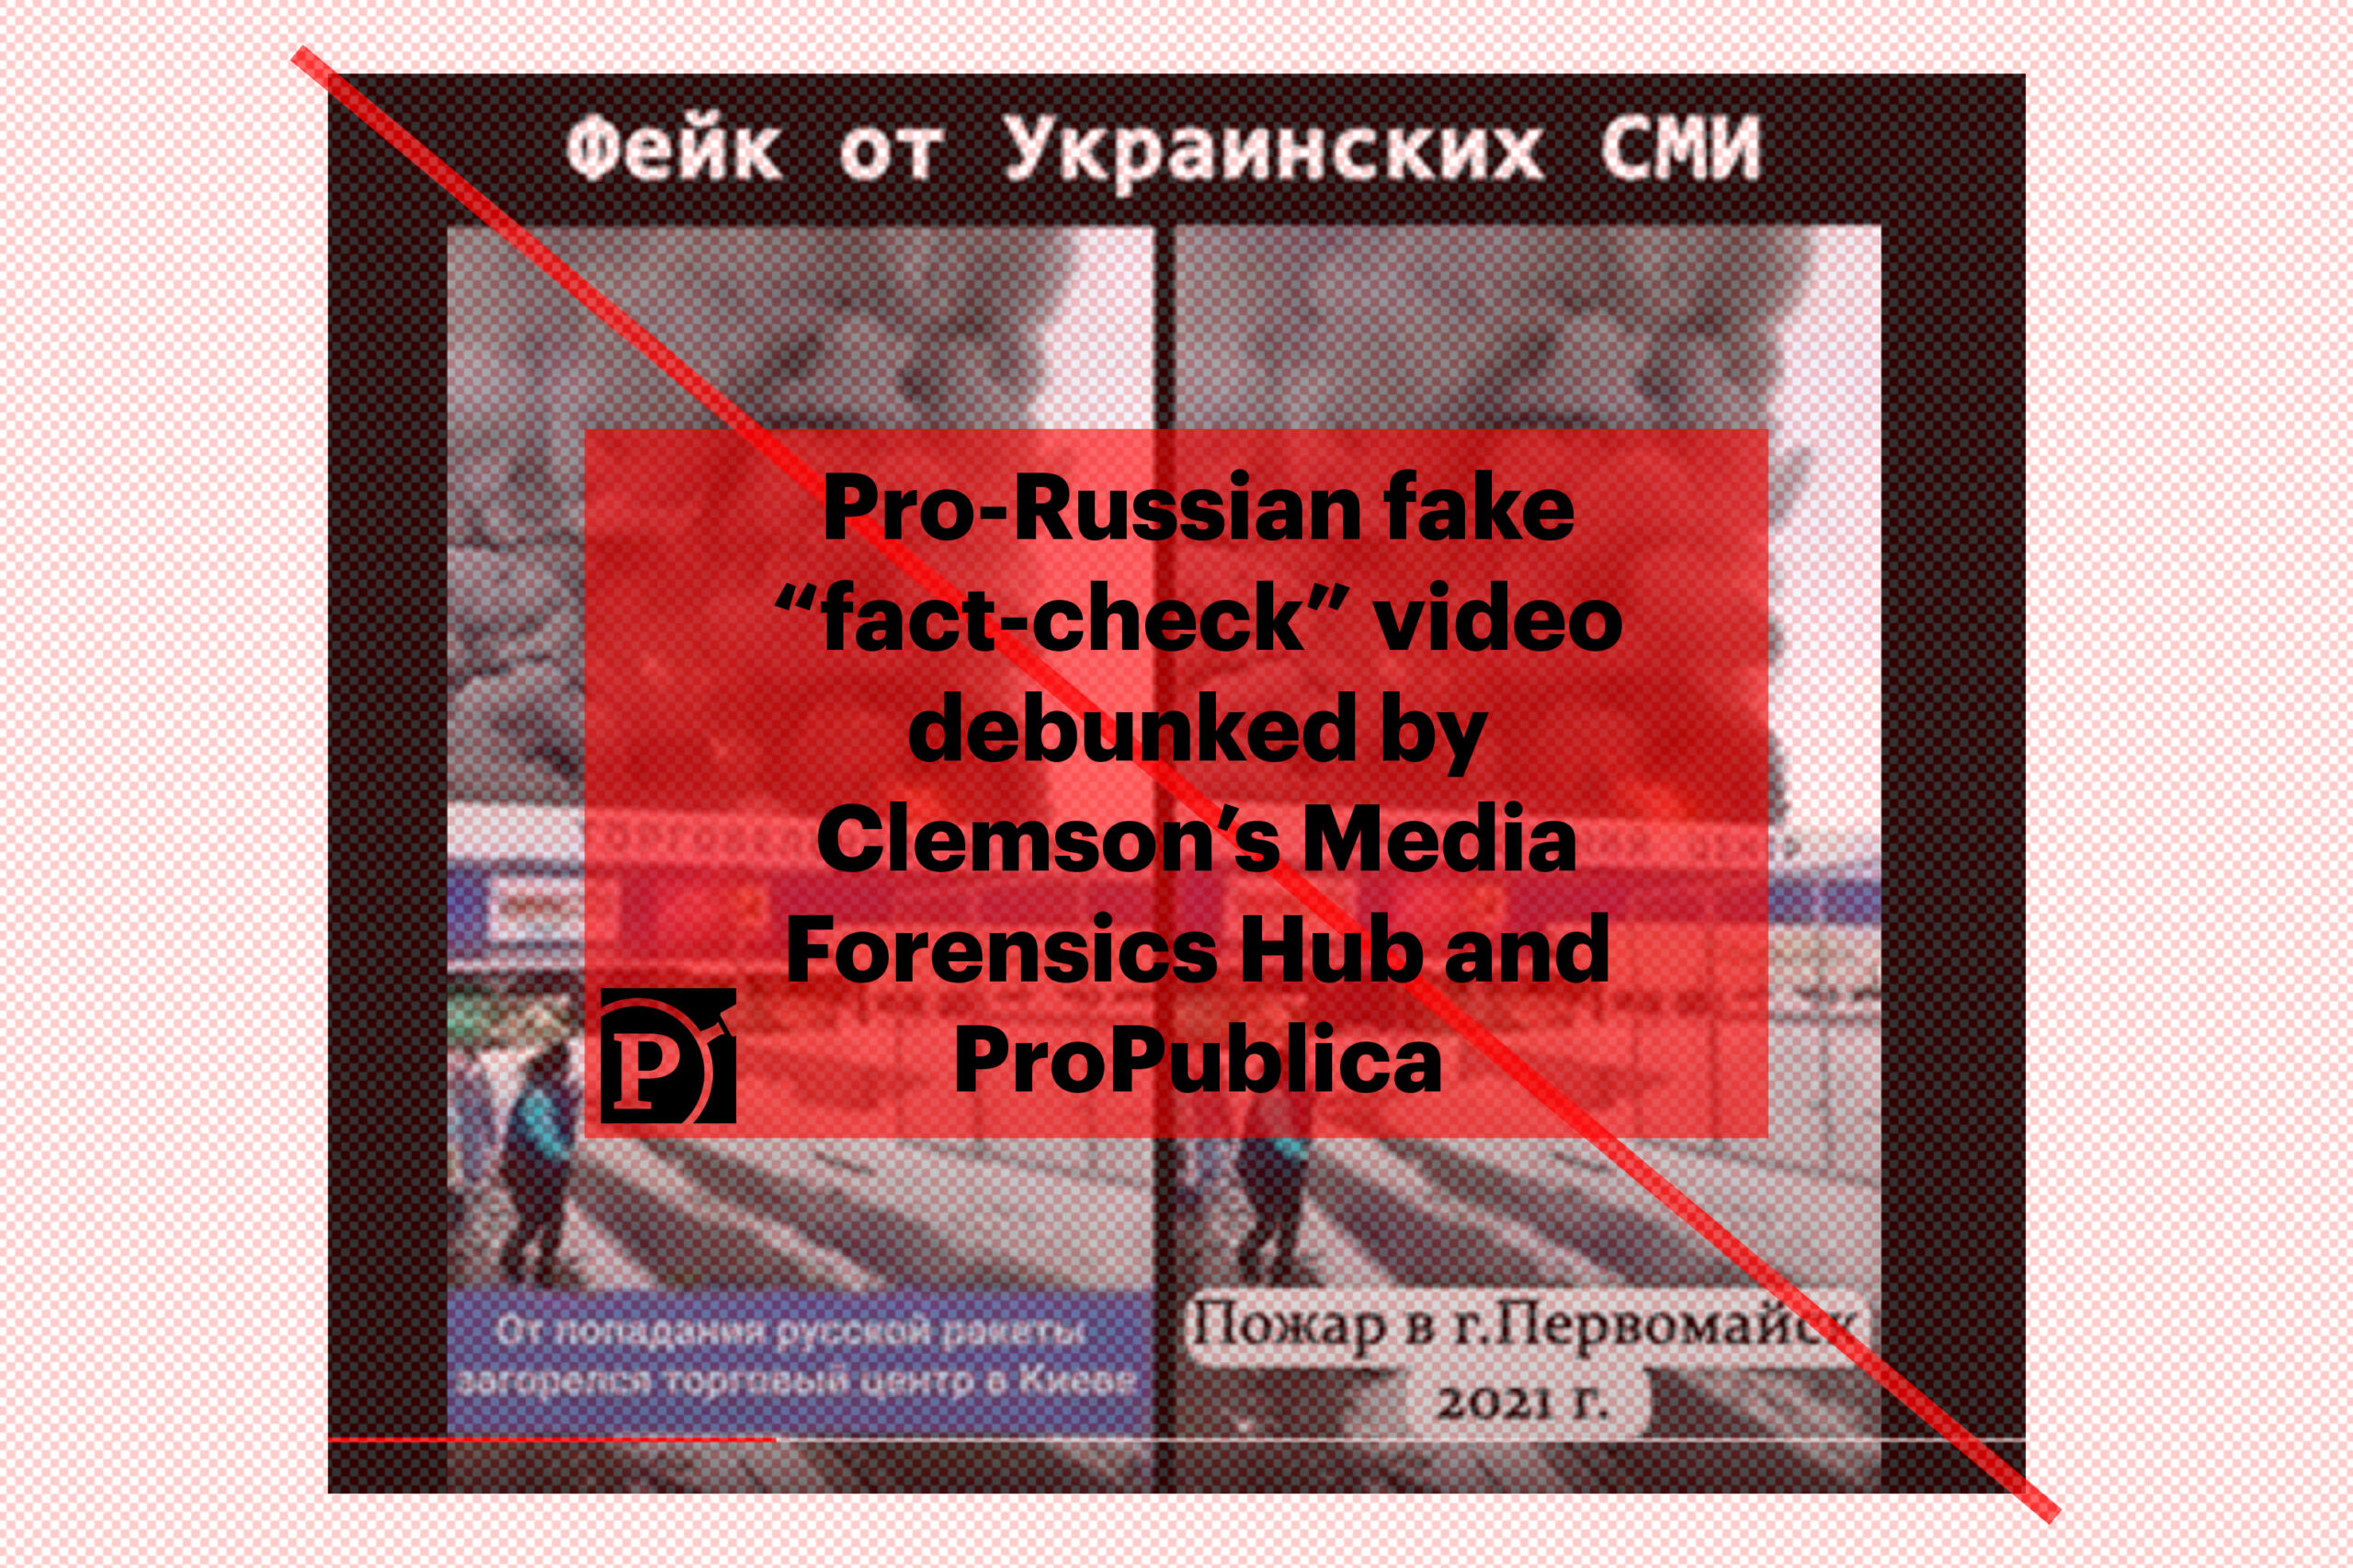 Stills from a Russian-language video that falsely claims to fact-check Ukrainian disinformation. There’s no evidence the video was created by Ukrainian media or circulated anywhere, but the label at the top says the video is “Fake Ukrainian media.” The captions on the left inaccurately label the footage as “A shopping center in Kyiv caught on fire after being hit by a Russian rocket,” falsely attributing the claim to Ukrainian media. The caption on the right correctly identifies the event as “Fire in Pervomais’k from 2021.” Screenshot by ProPublica